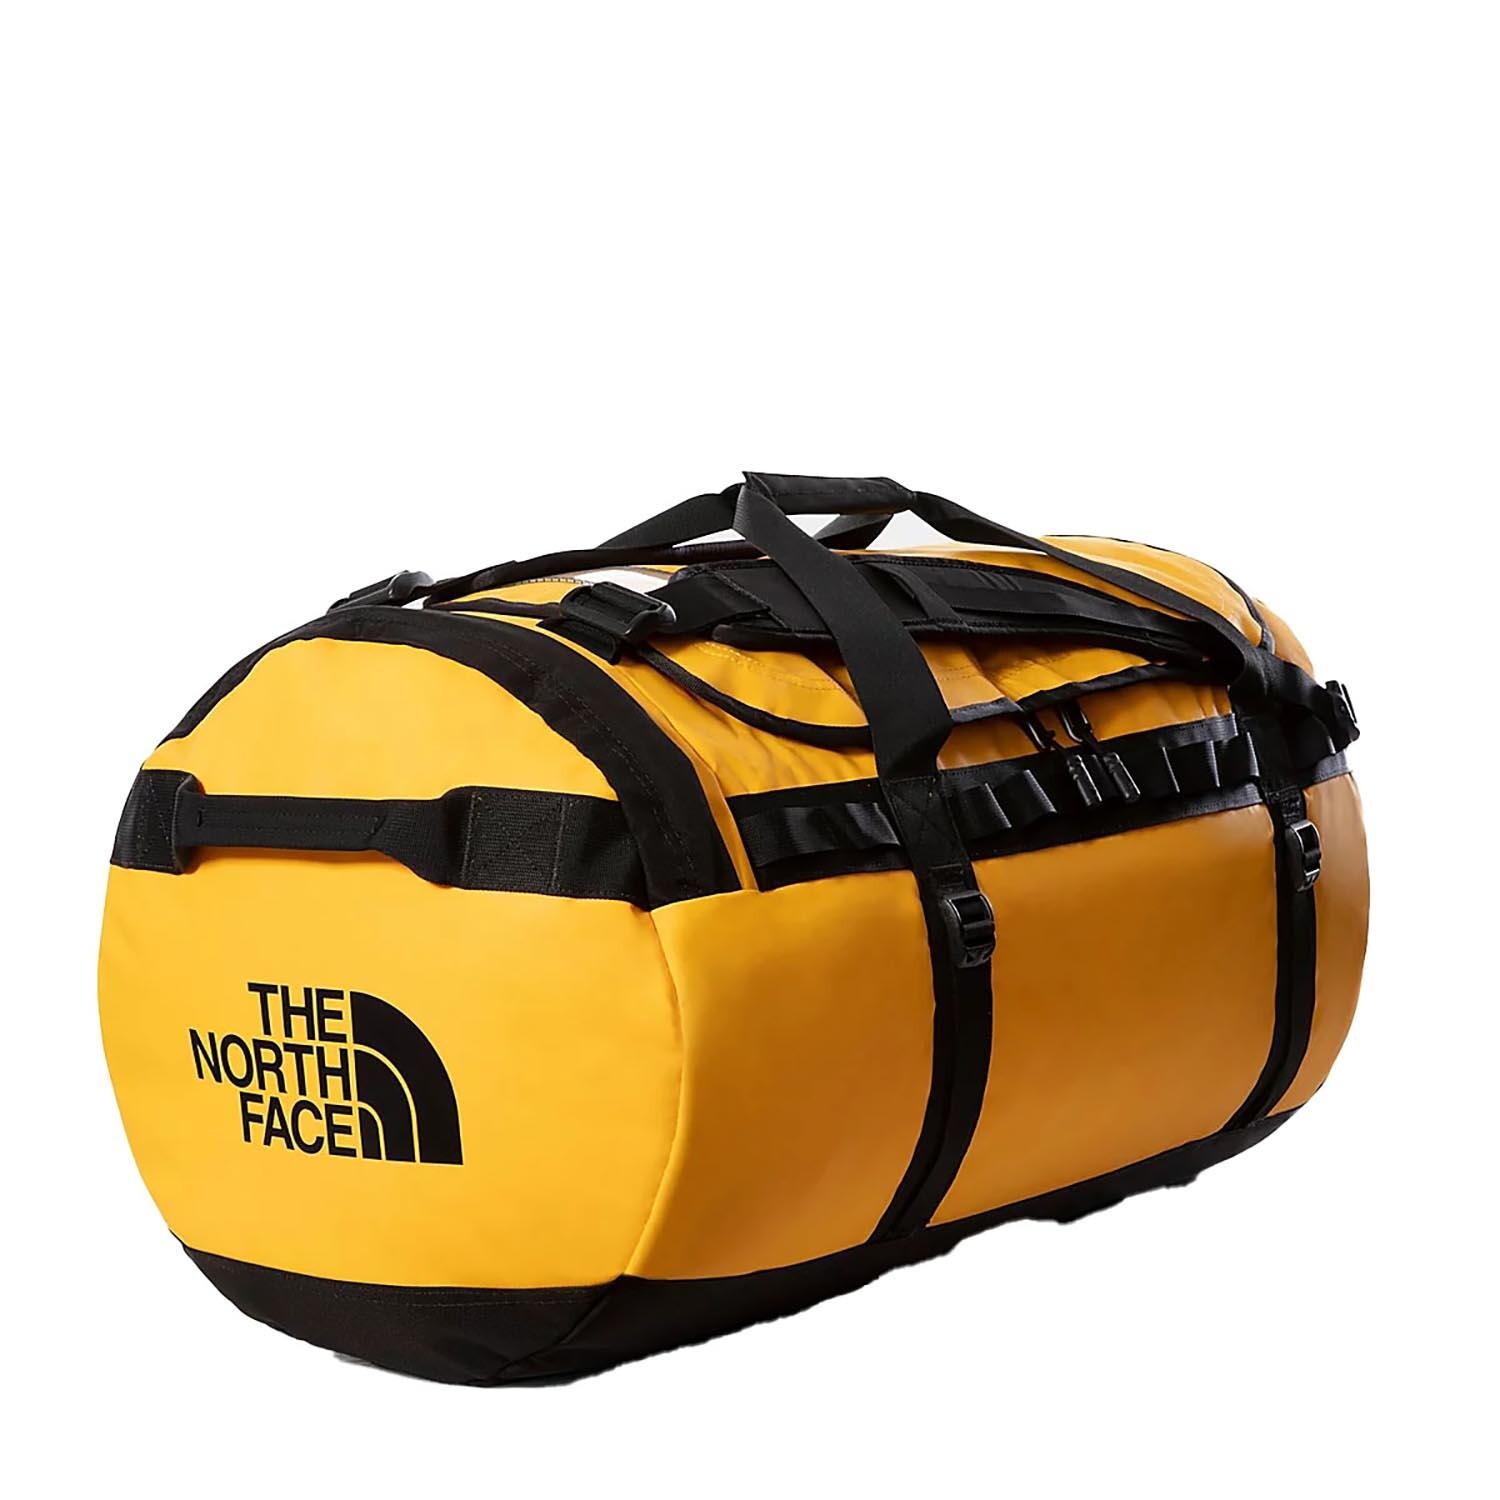 The North Face Duffel - Large